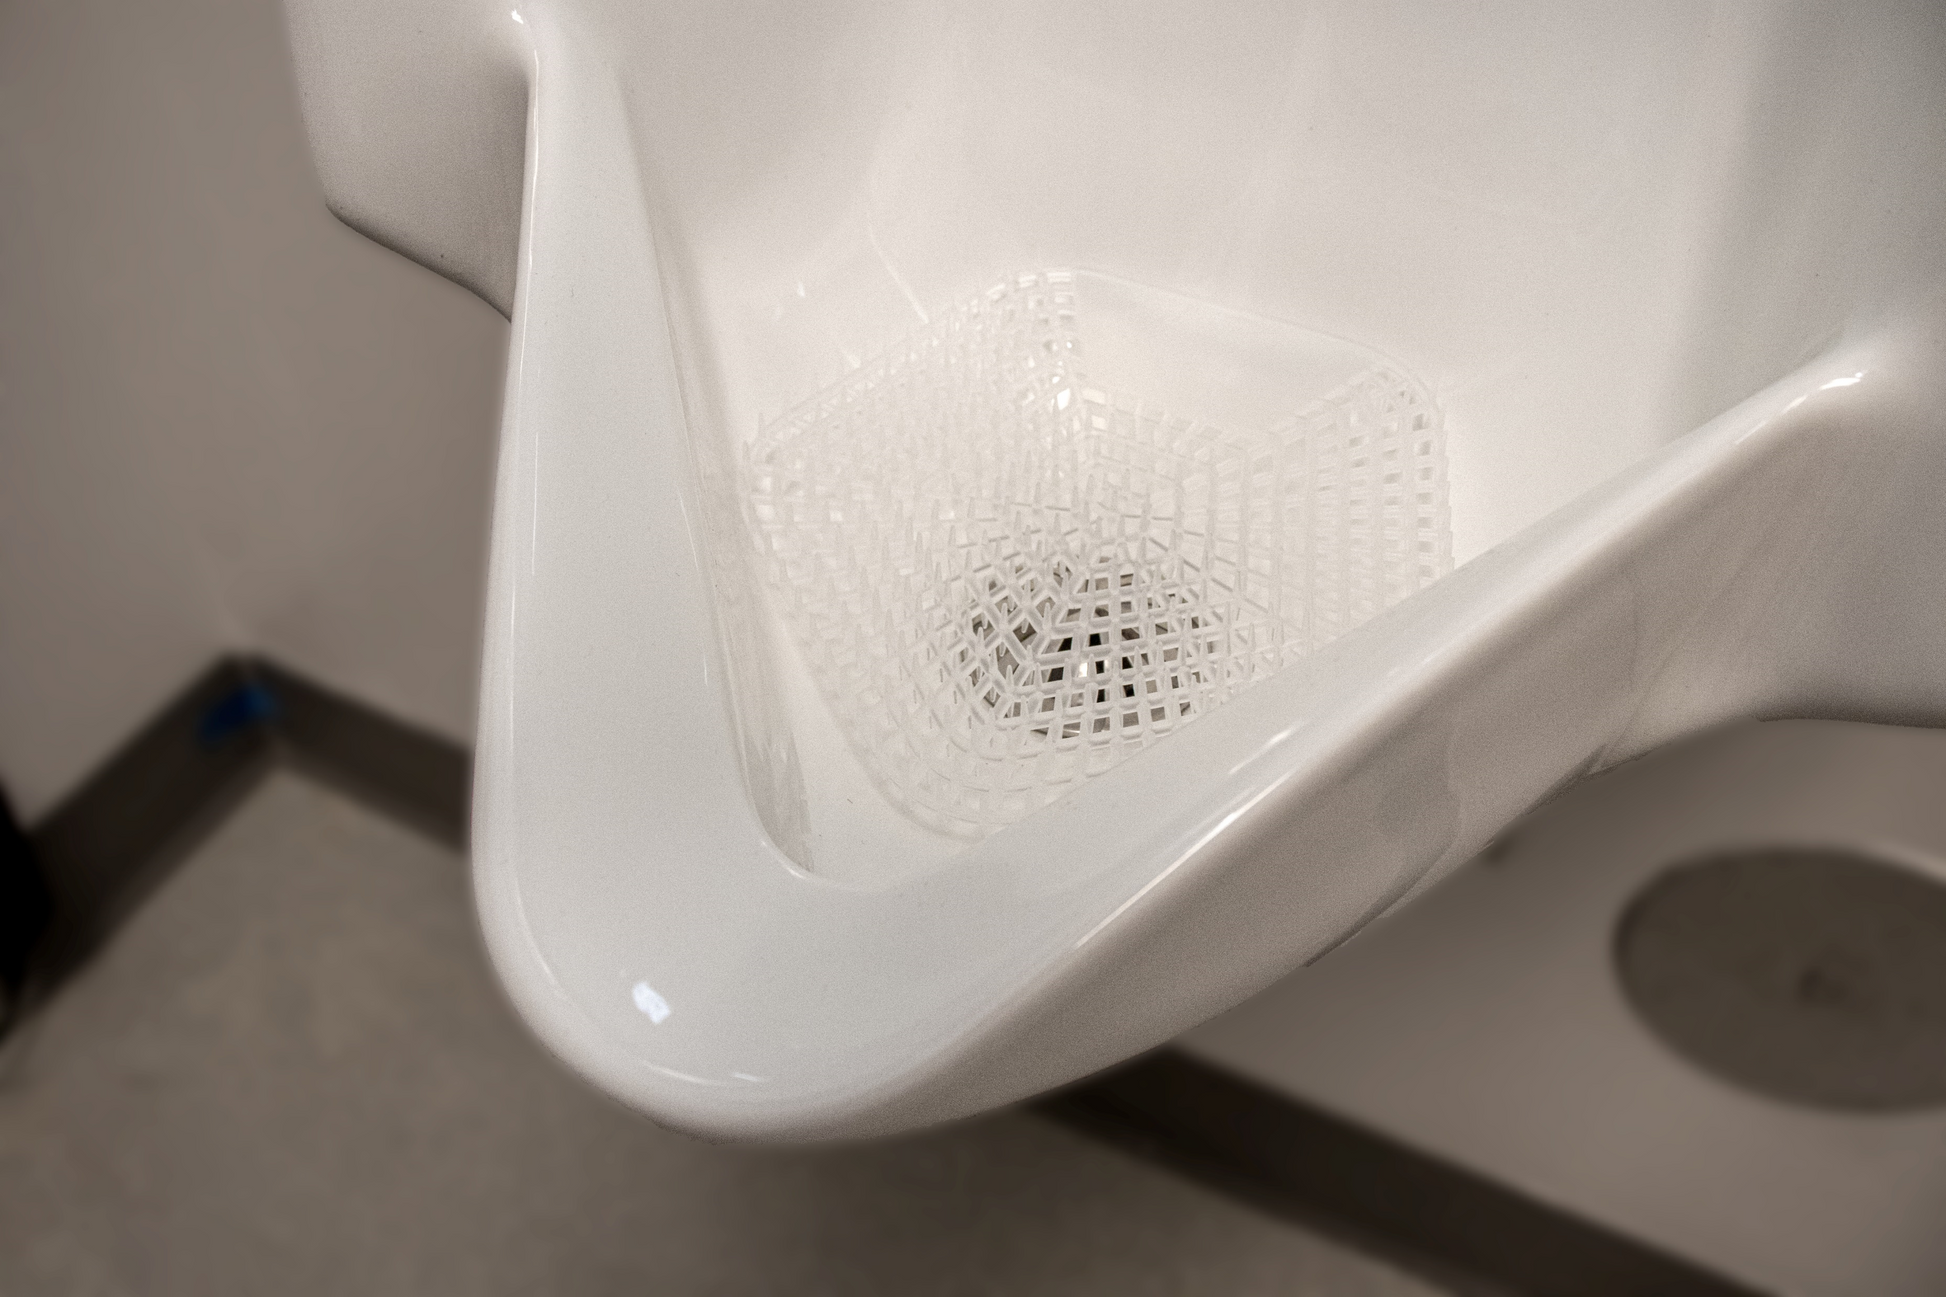 An image of the WCBasix Fresh Linen (Clear colour) in a white urinal